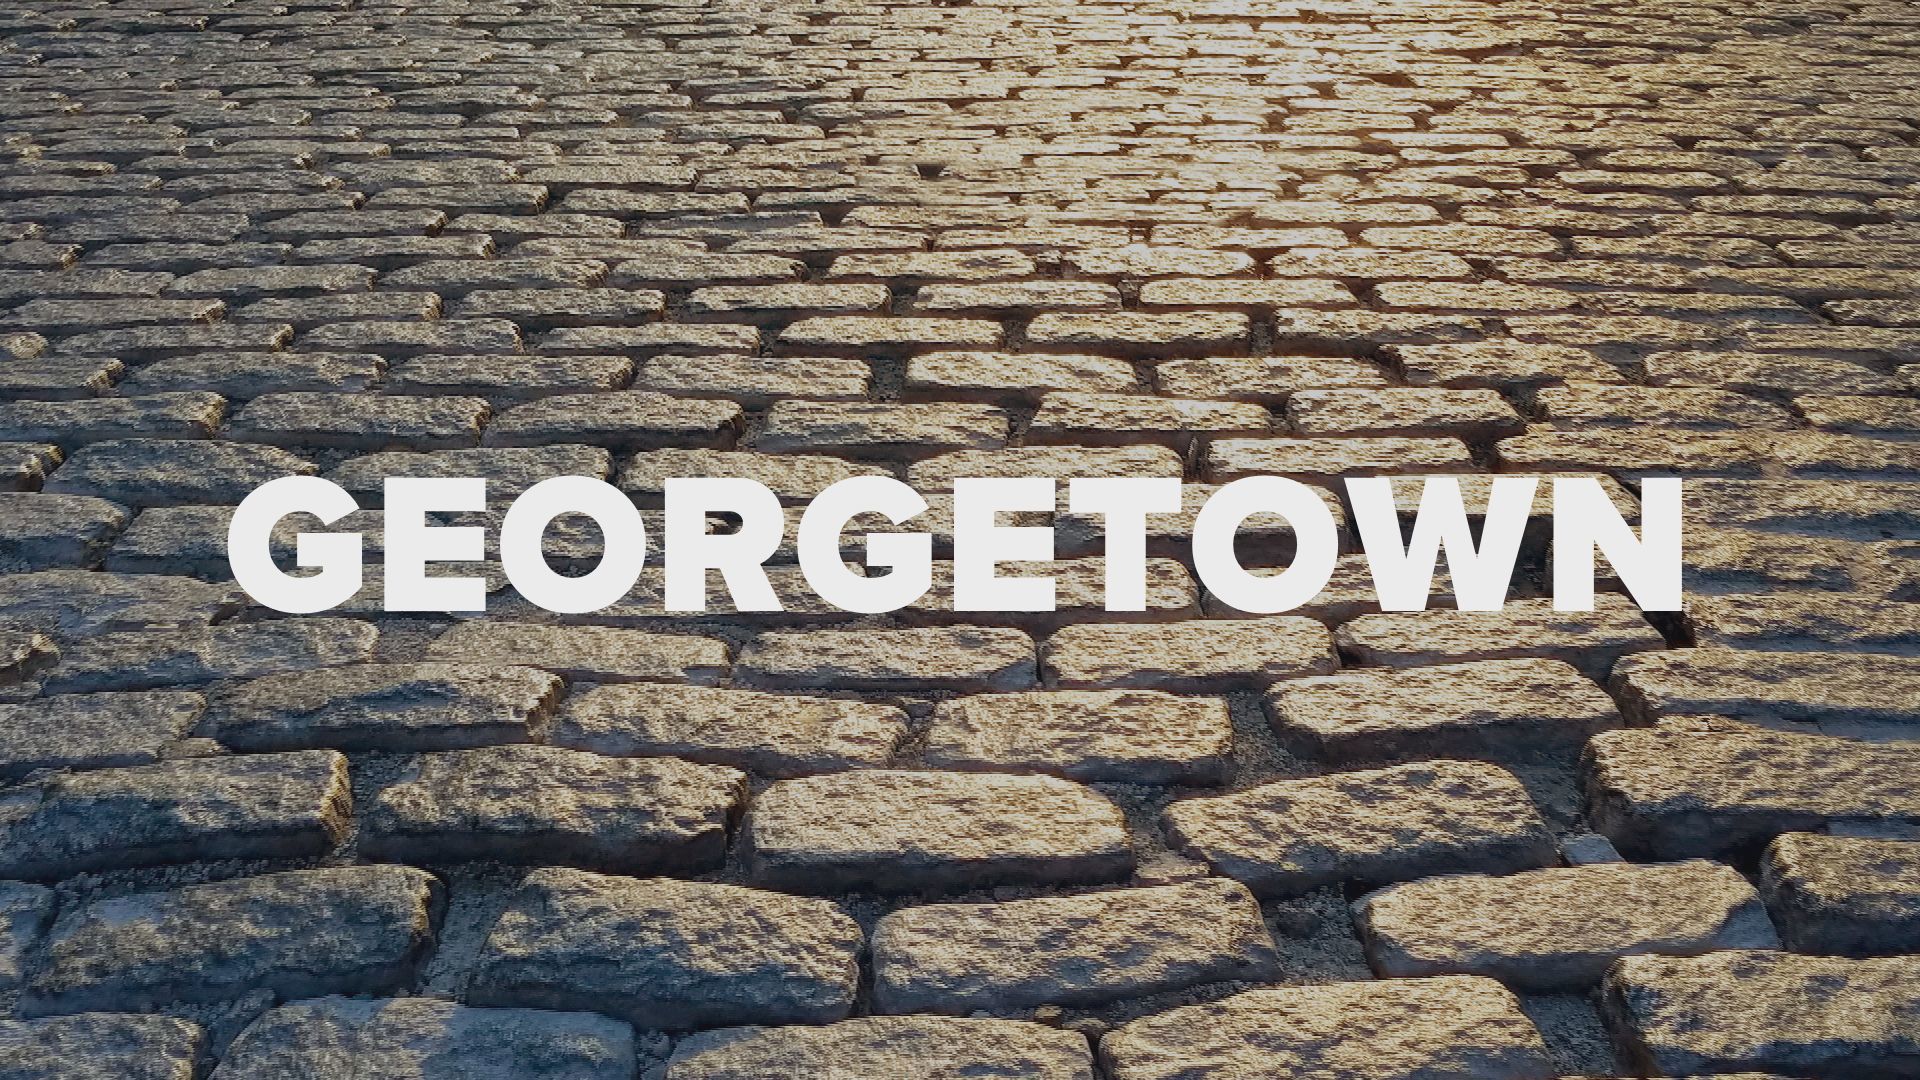 Long before there was a city of Washington or a District of Columbia, there was an area first known as the Town of George.